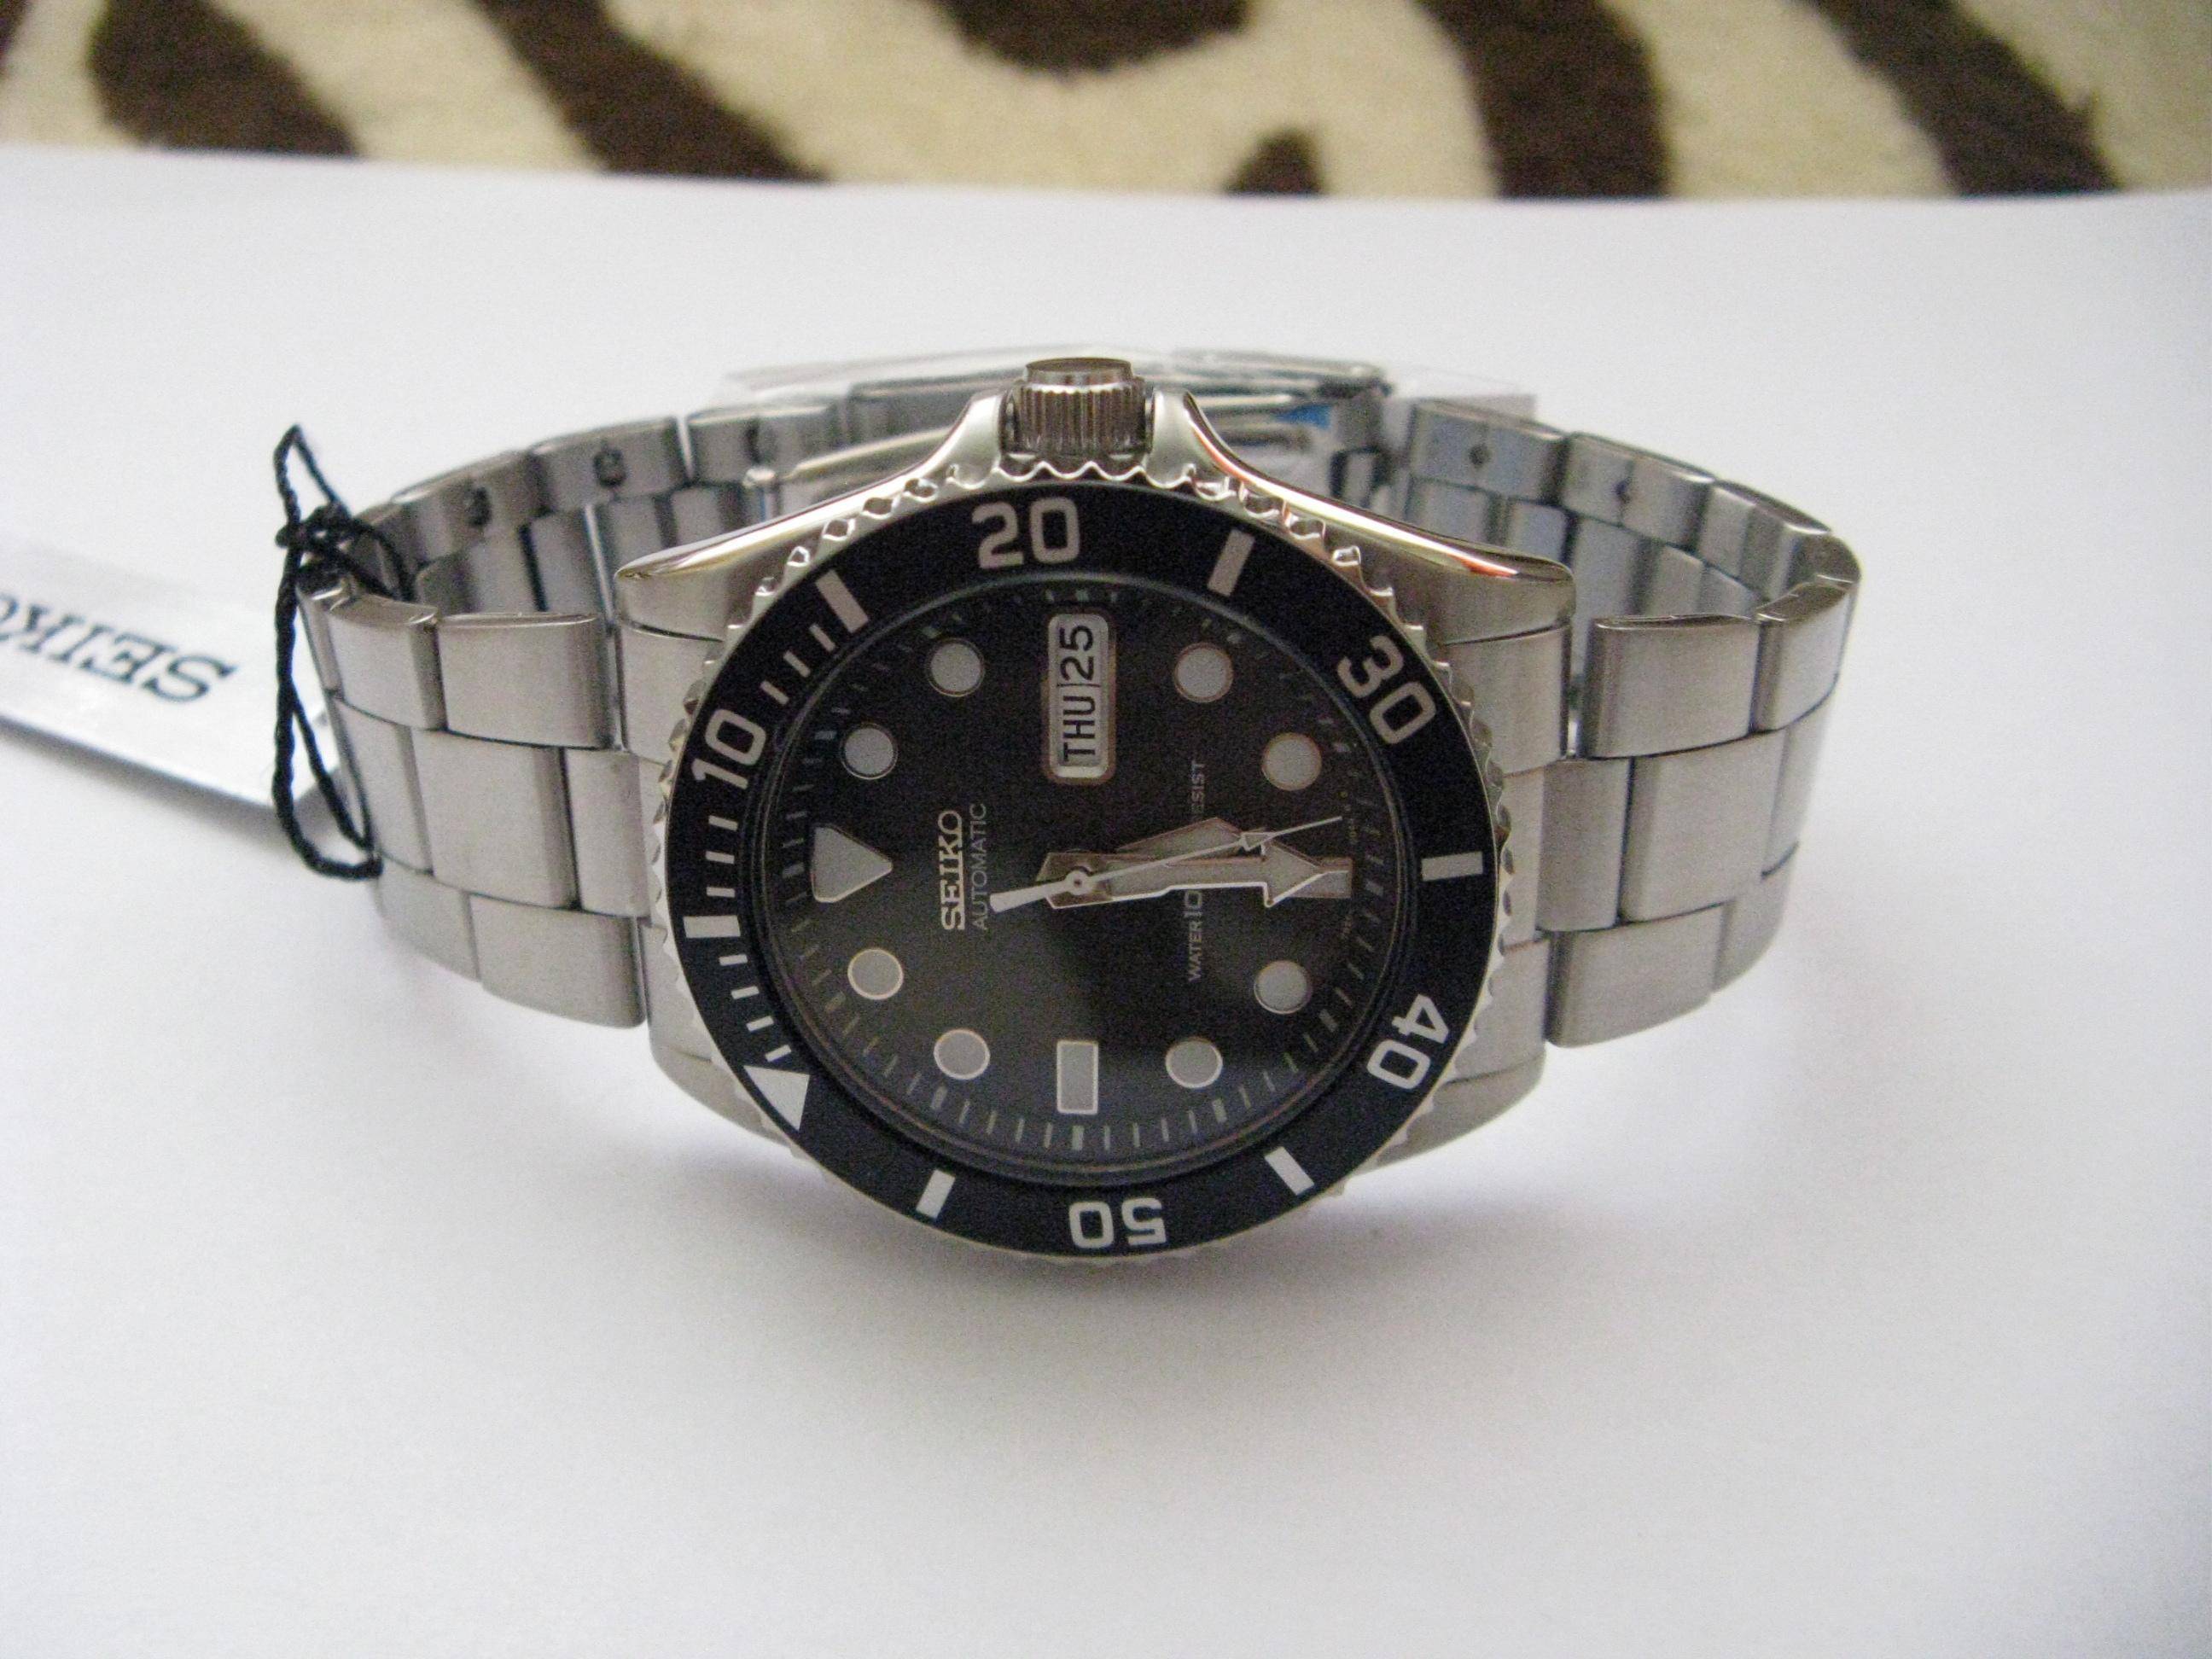 Seiko Automatic Diver's Mid-size SKX031 ) - ChronoTales